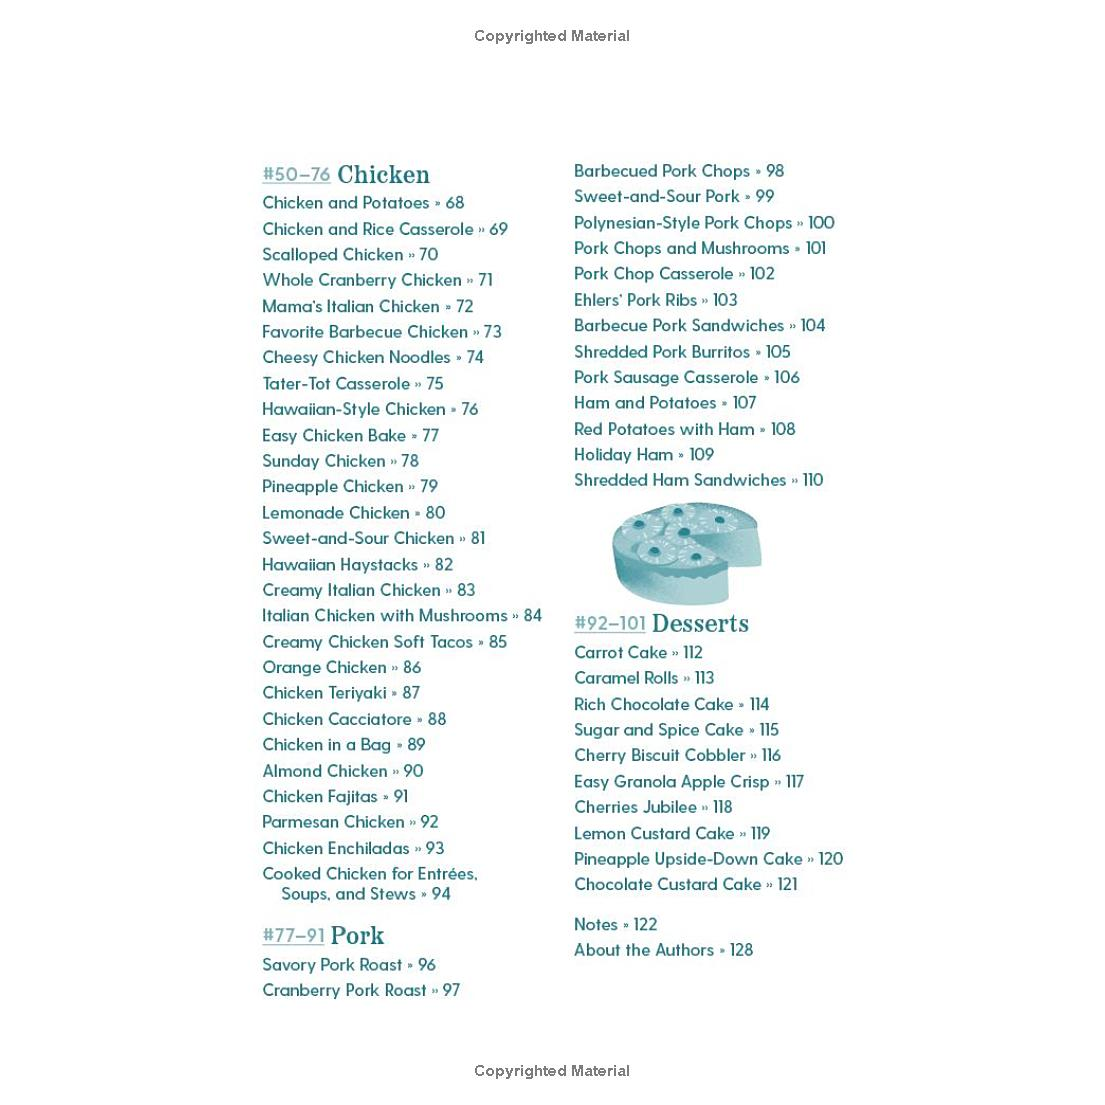 101 Things to Do With a Slow Cooker (New Edition) by Stephanie Ashcraft & Janet Eyring